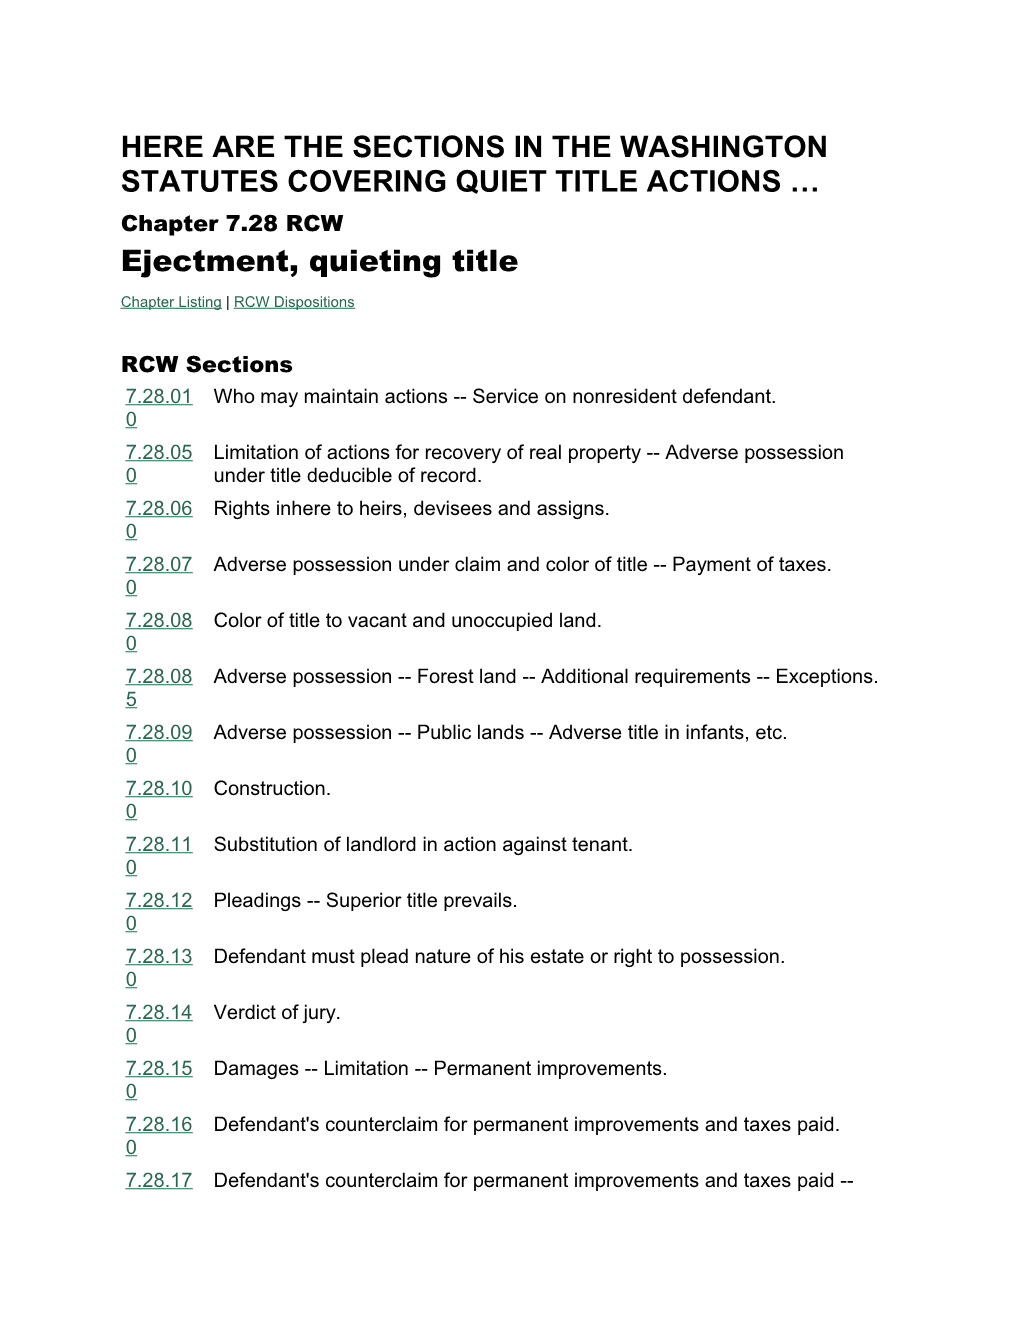 Here Are the Sections in the Washington Statutes Covering Quiet Title Actions